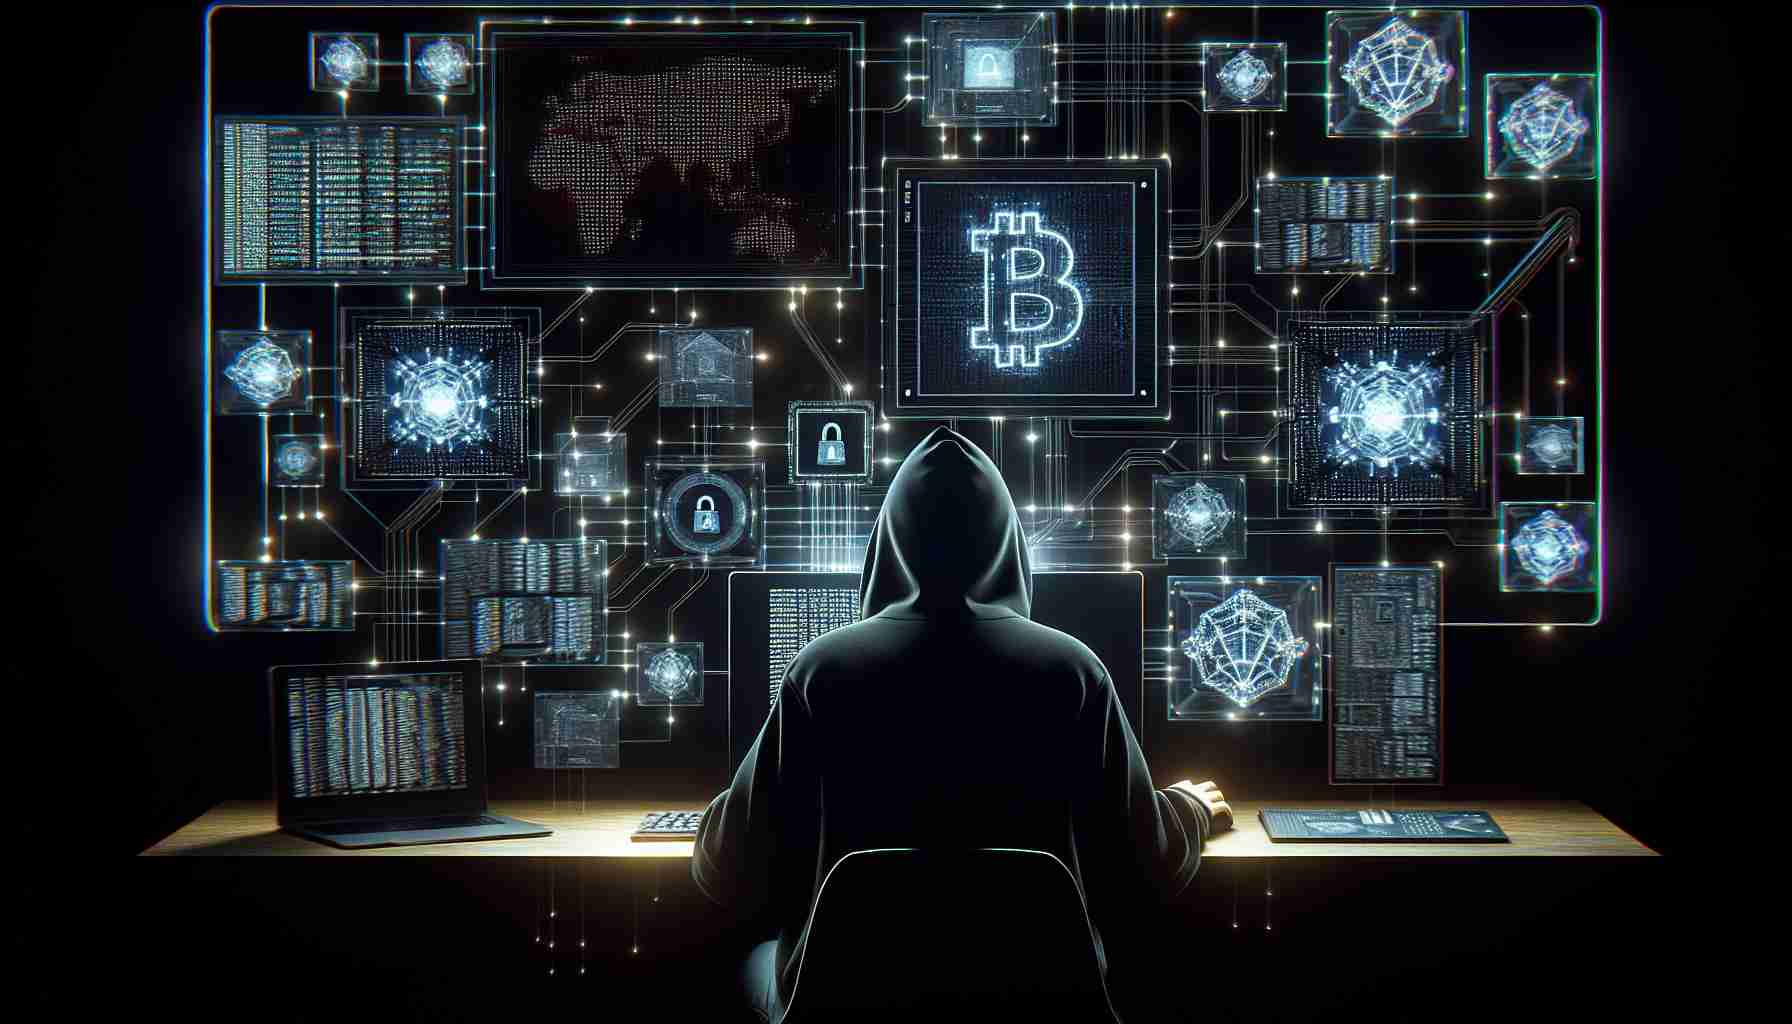 Realistic high-definition imagery of the concept of digital heists, focusing on crypto platforms. The image could portray a typical cryptographic interface with signs of security violation and unauthorized access. The scene might include hacker motifs such as a black hood and luminescent codes flowing across dark screens, to signify potential ethics breach and threat.